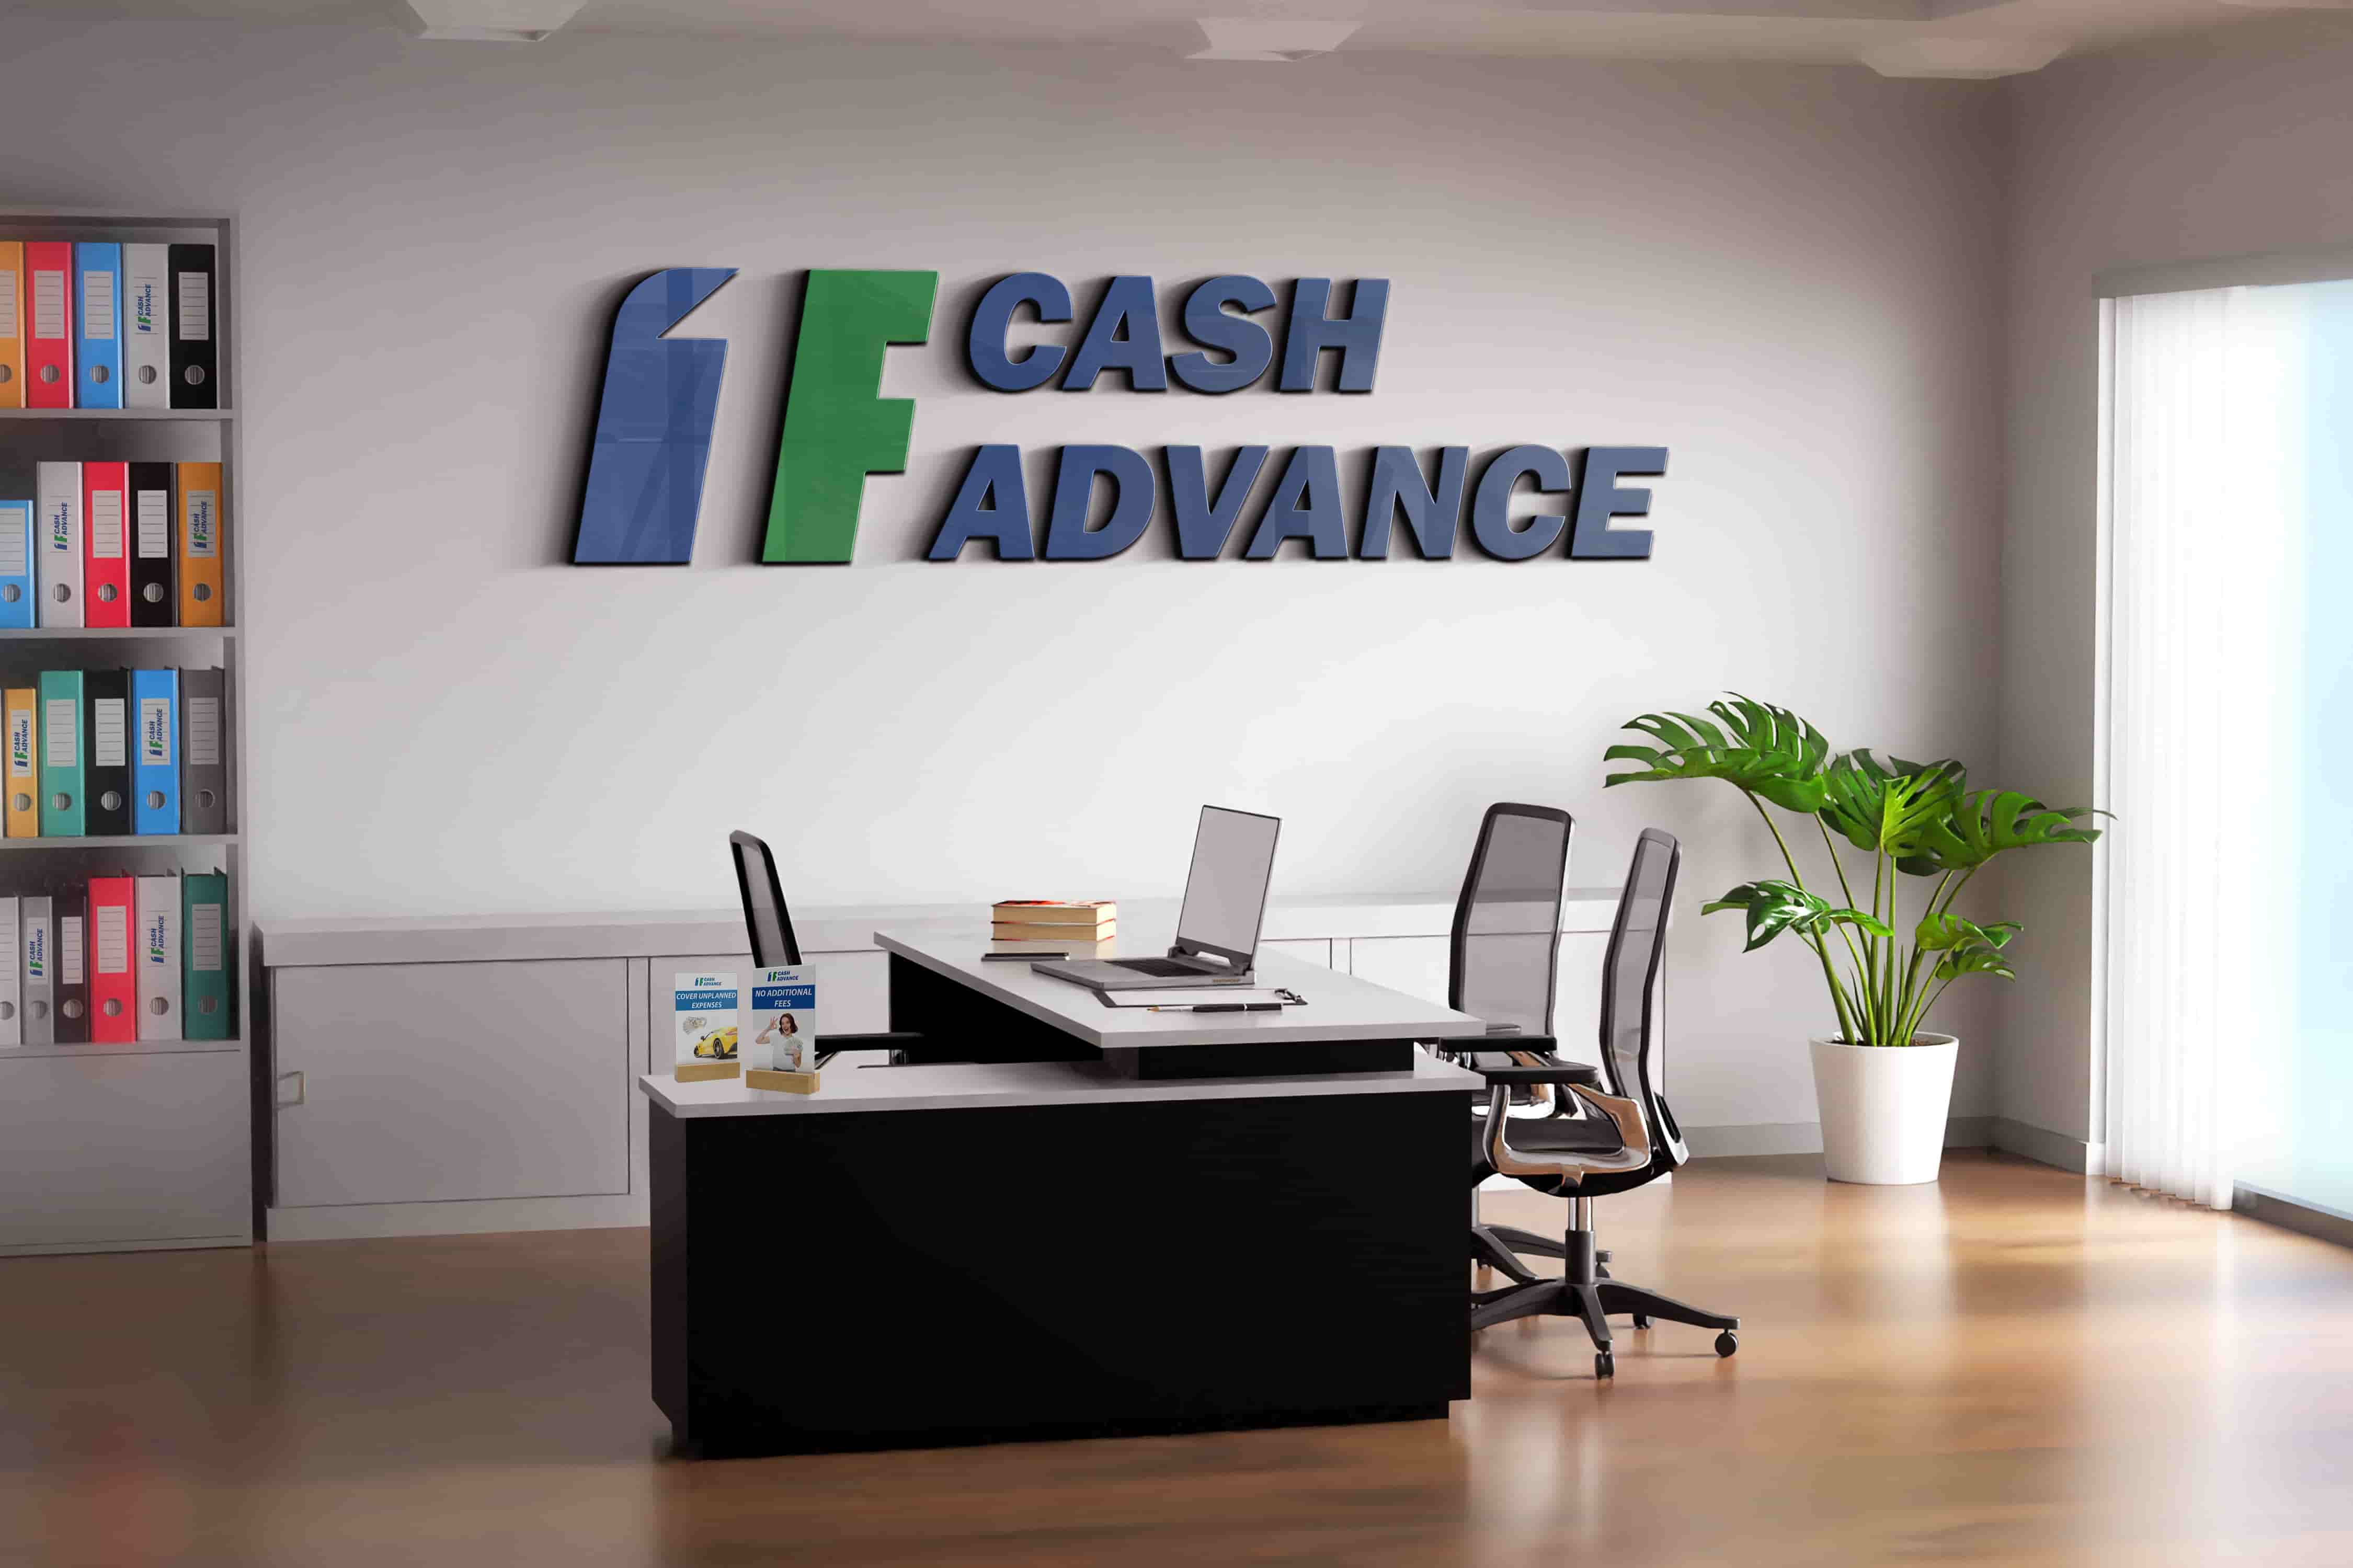 1F Cash Advance payday loans in Boulder, CO